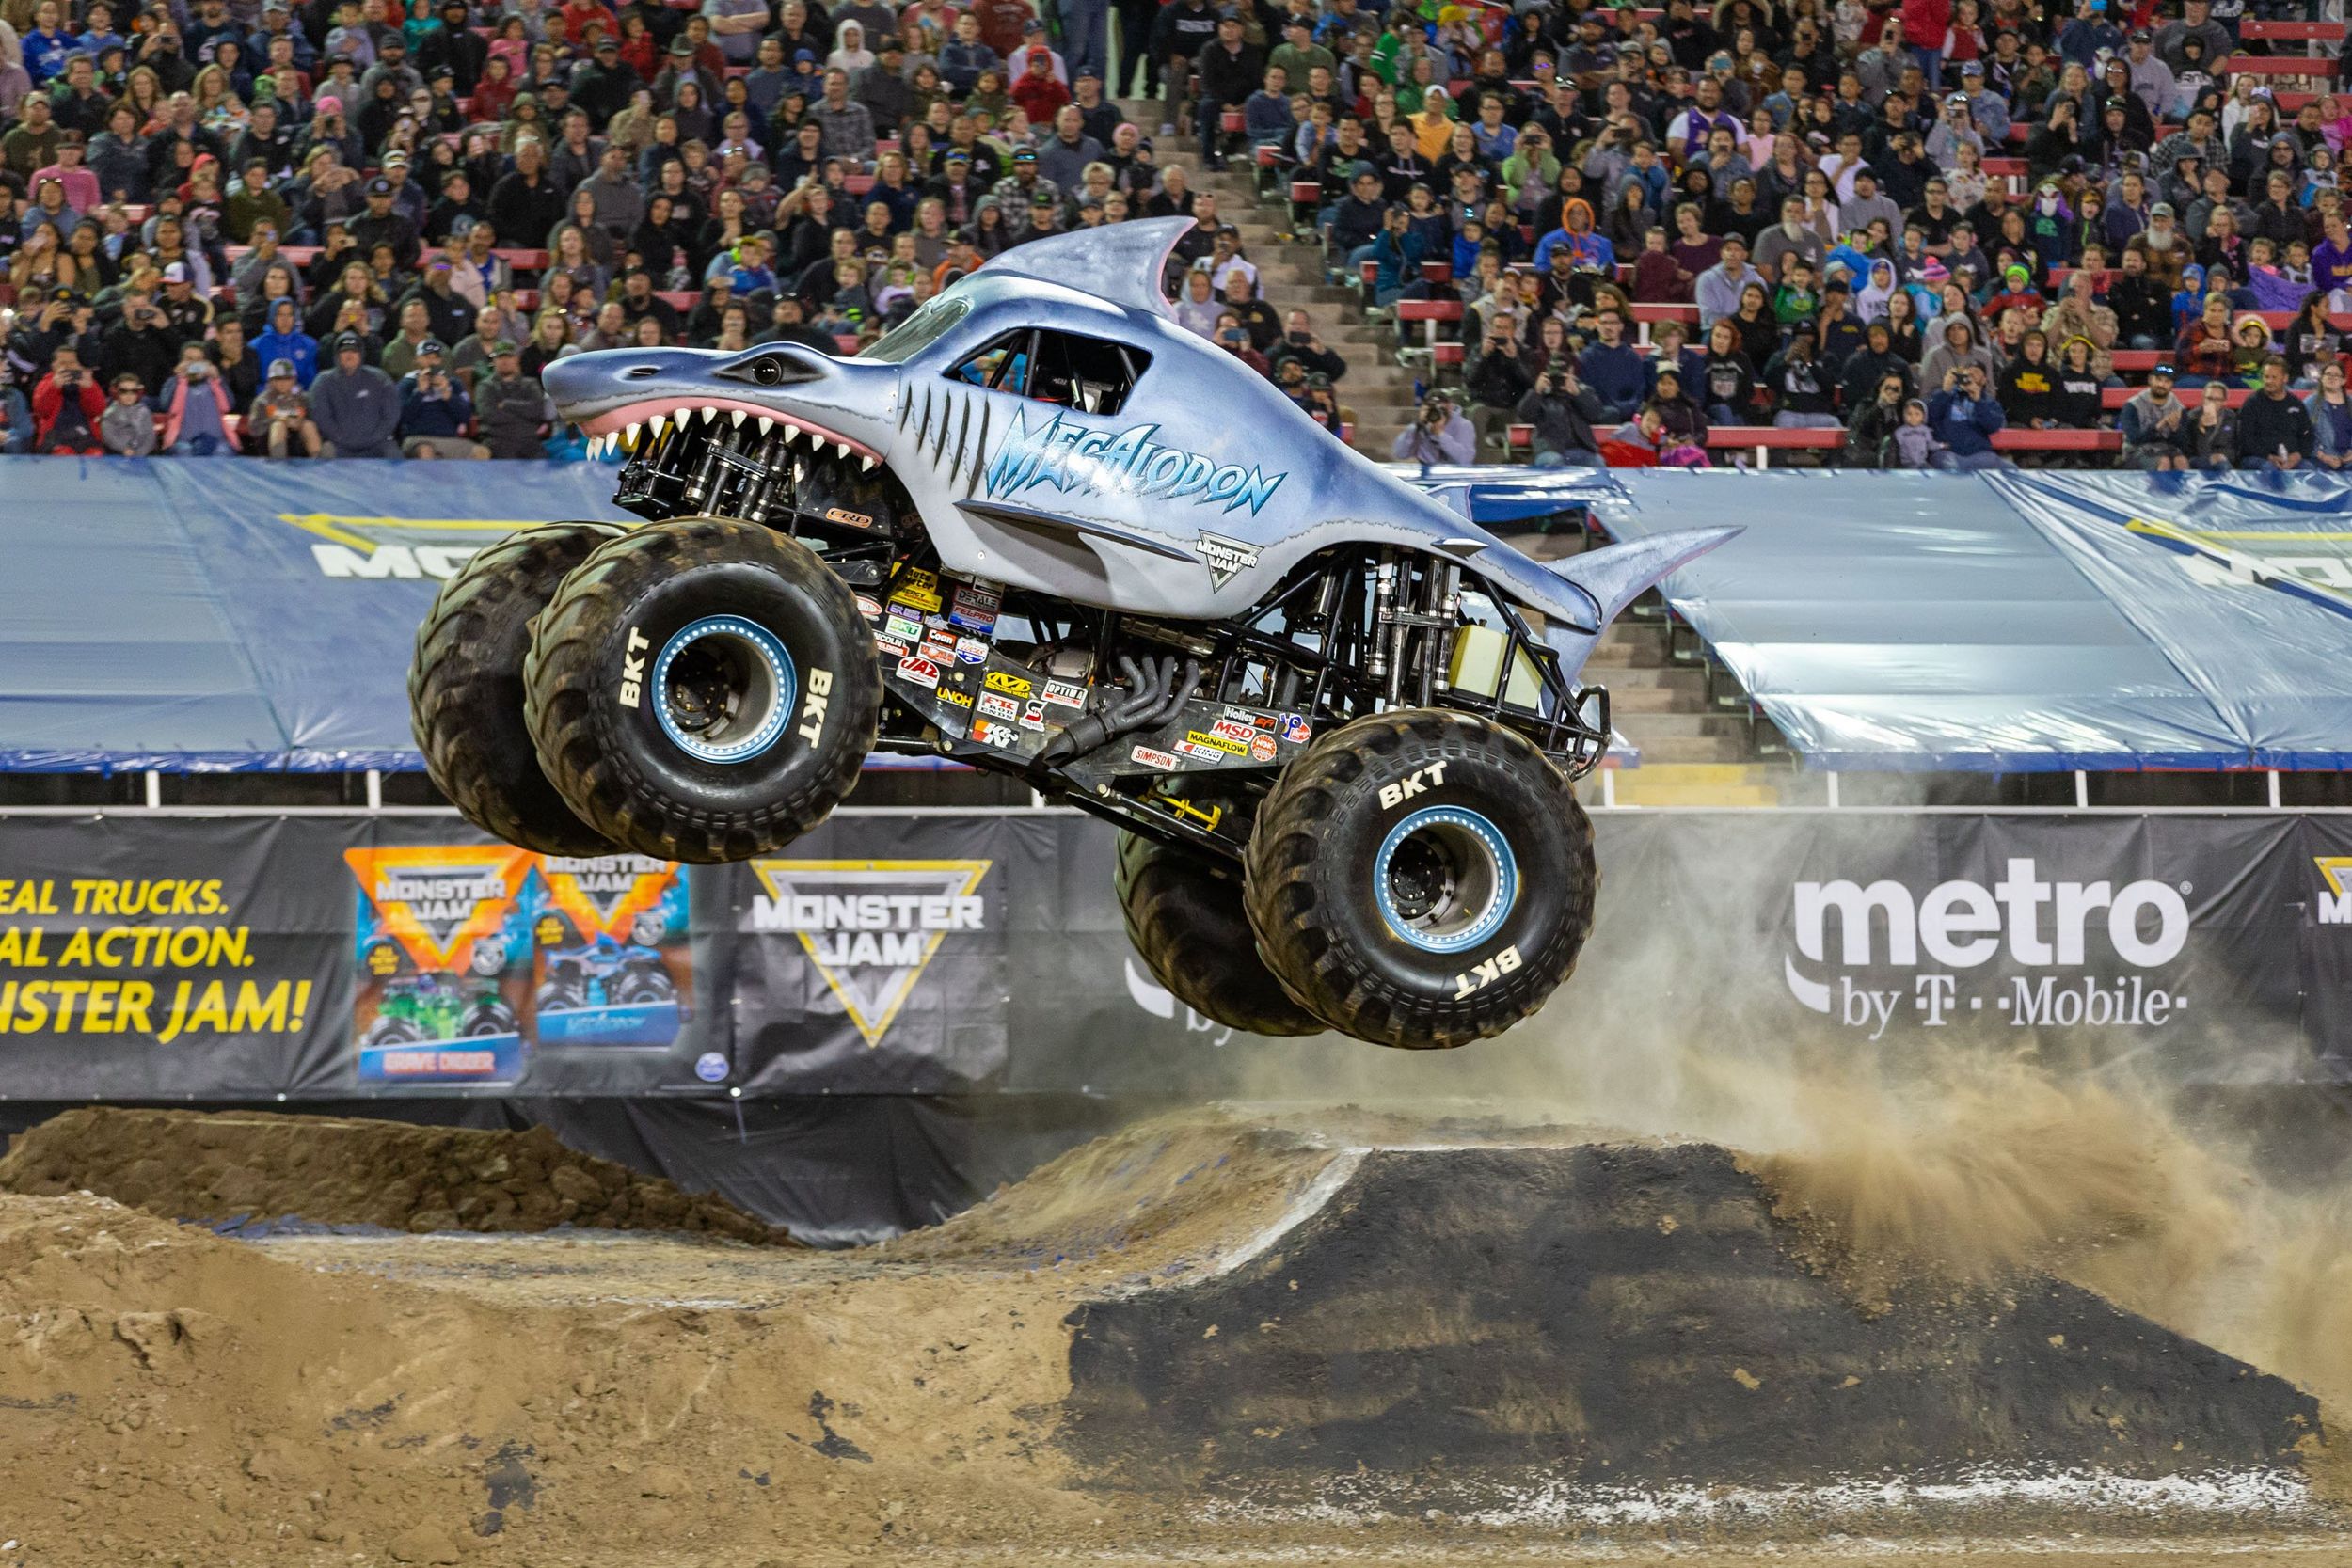 Big, fast and loud trucks return with Monster Jam at Spokane Arena this  weekend